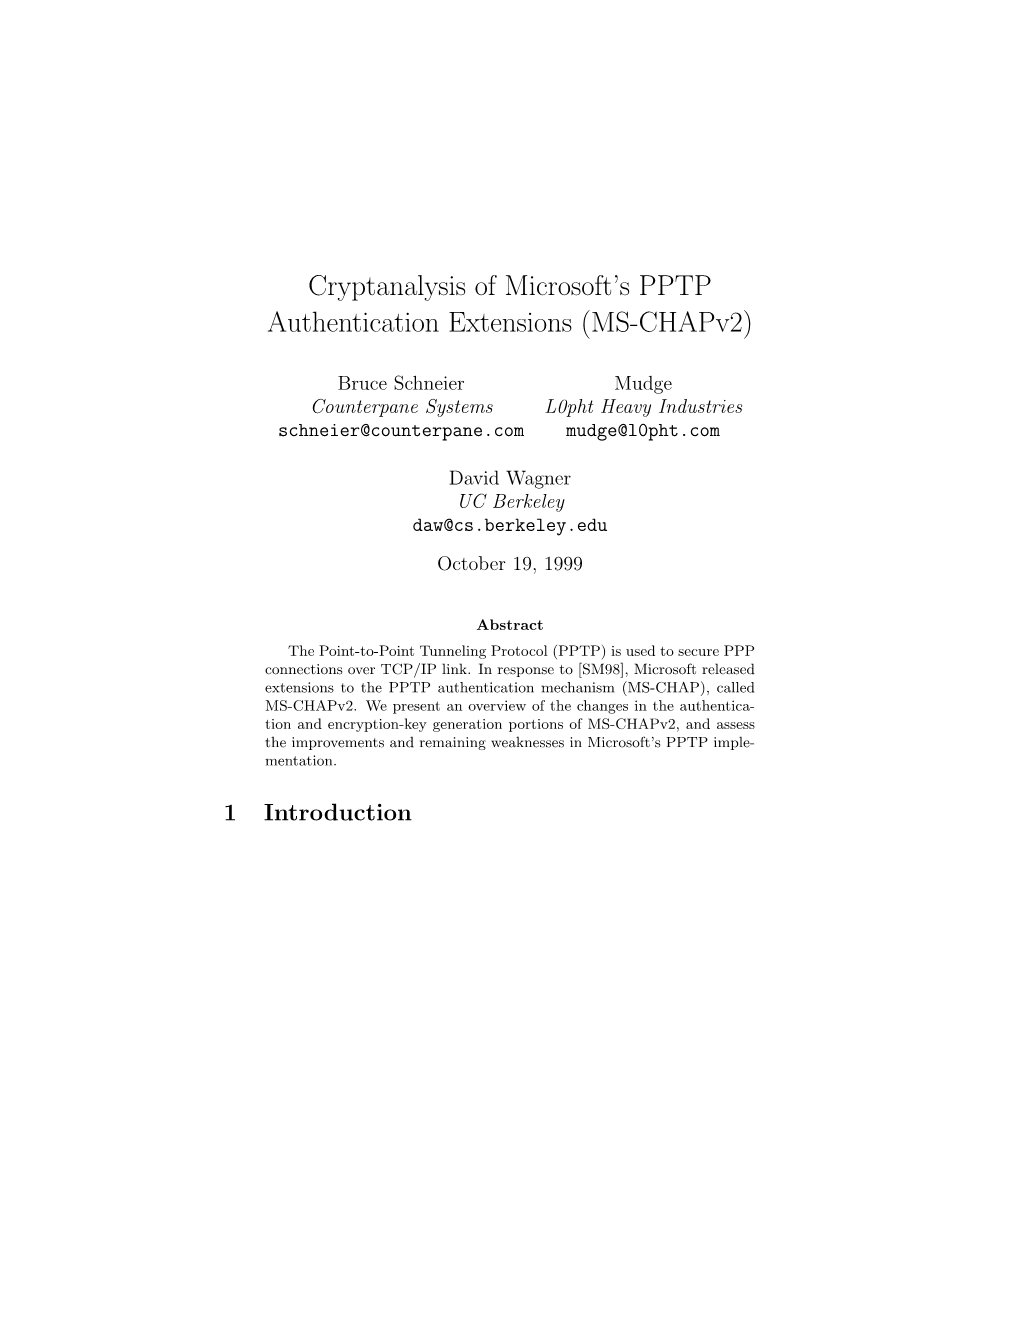 Cryptanalysis of Microsoft's PPTP Authentication Extensions (MS